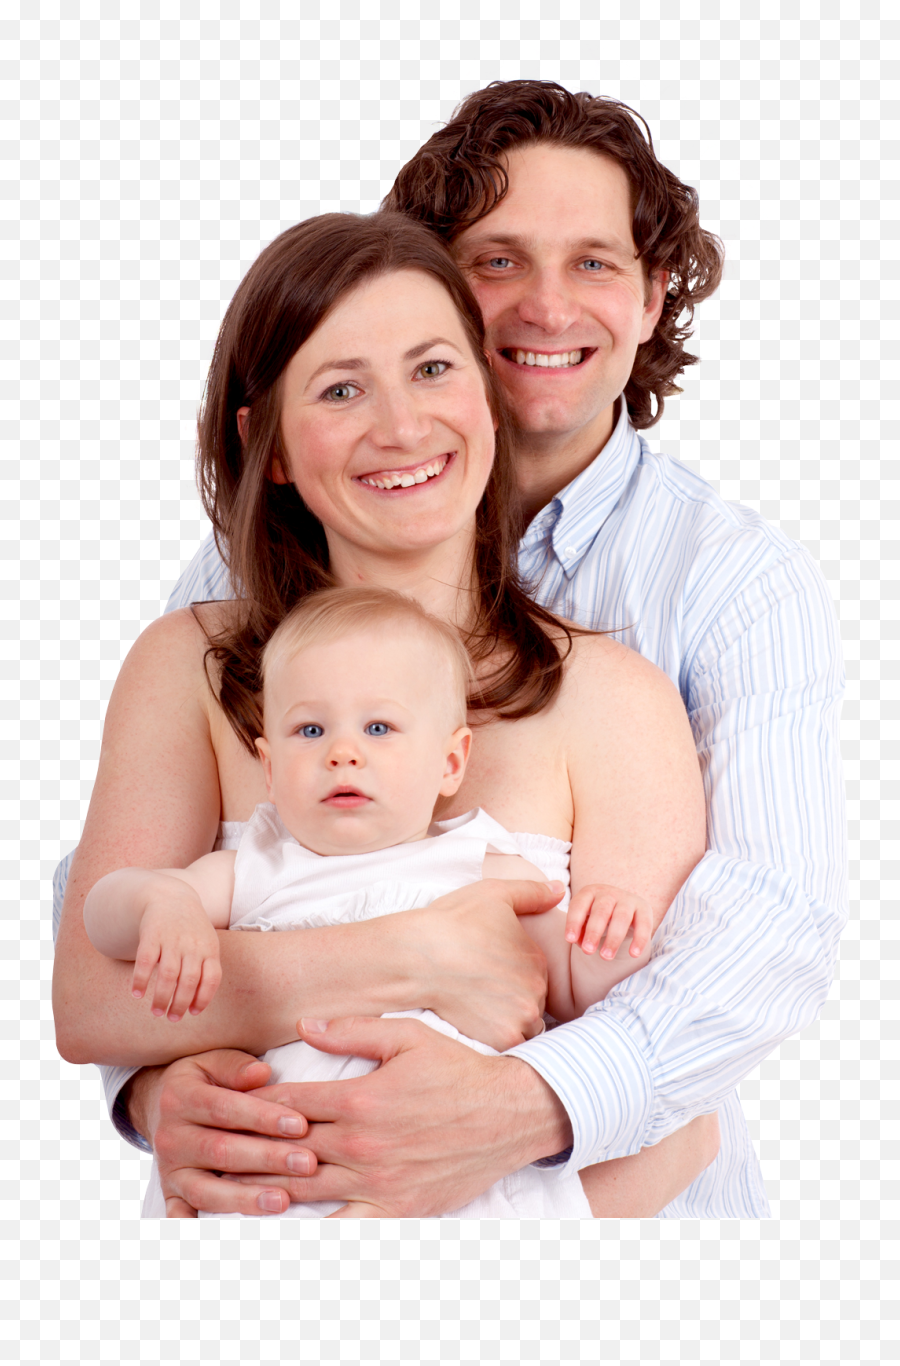 Couple With Baby Png Image - Purepng Free Transparent Cc0 Emoji,Baby Png